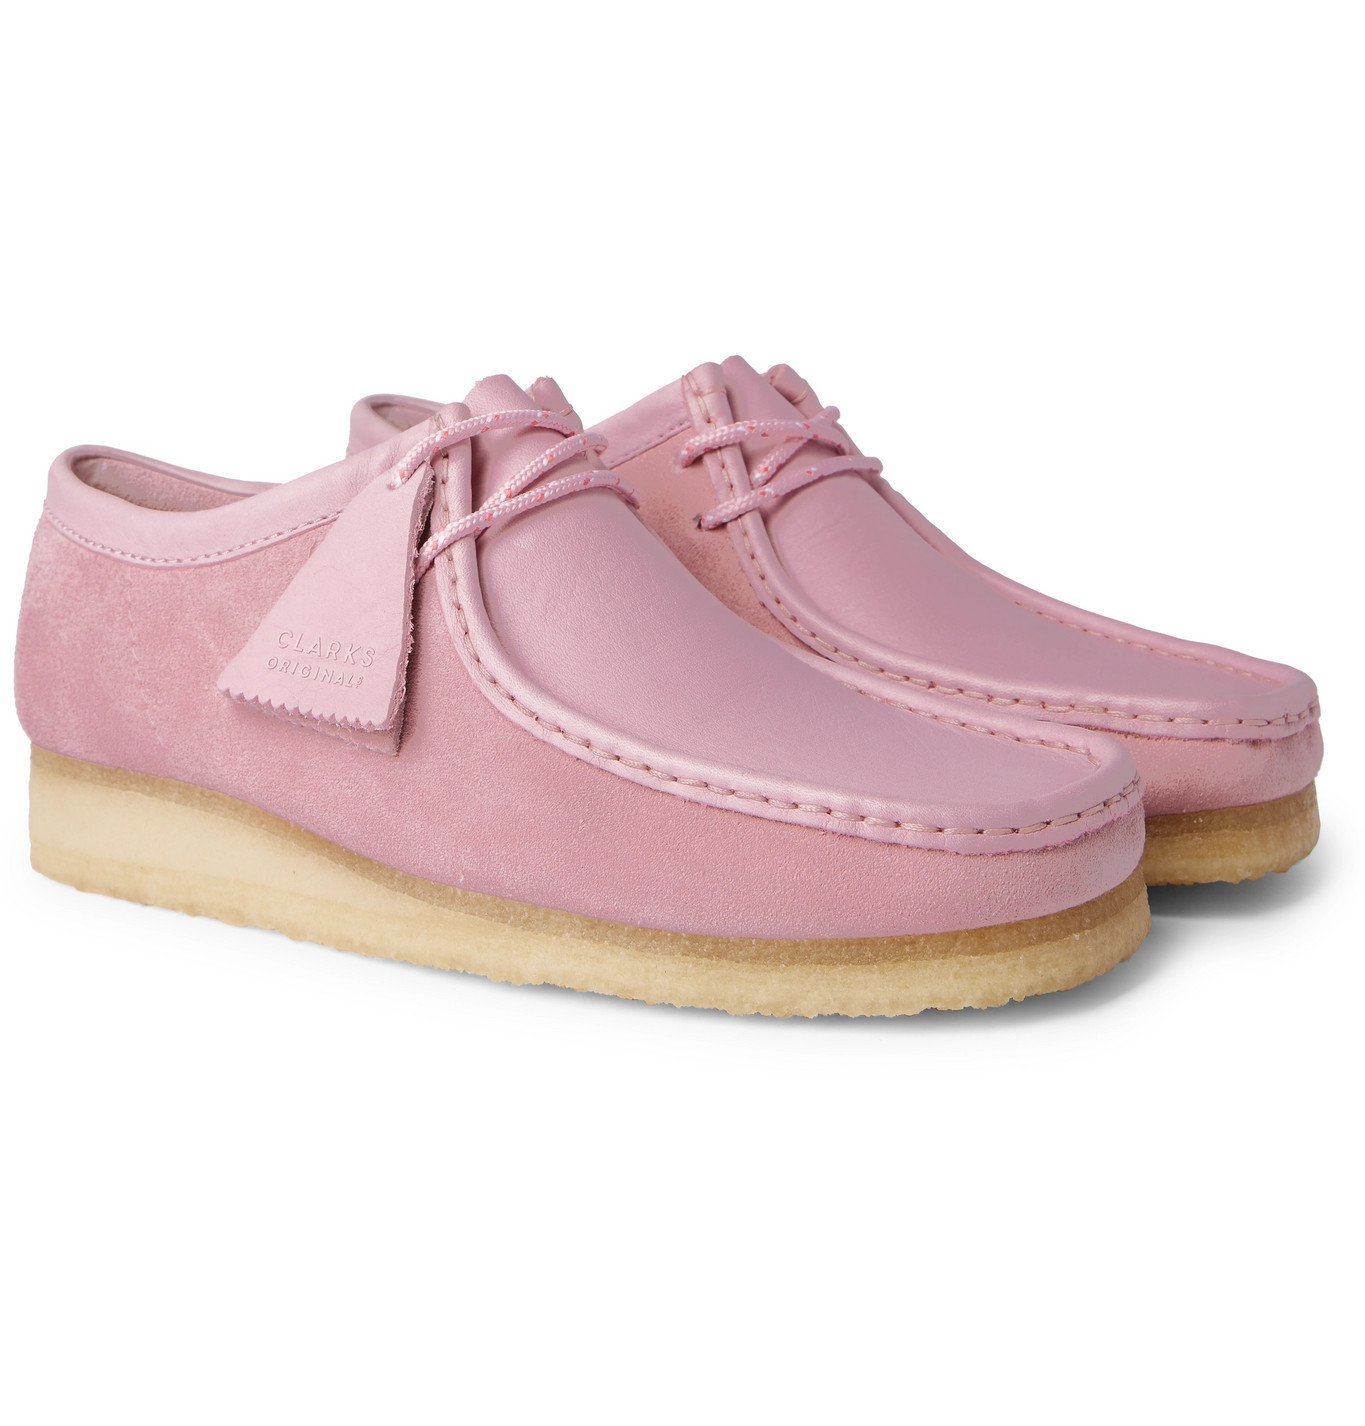 Clarks Originals - Wallabee Suede and Leather Desert Boots - Pink ...